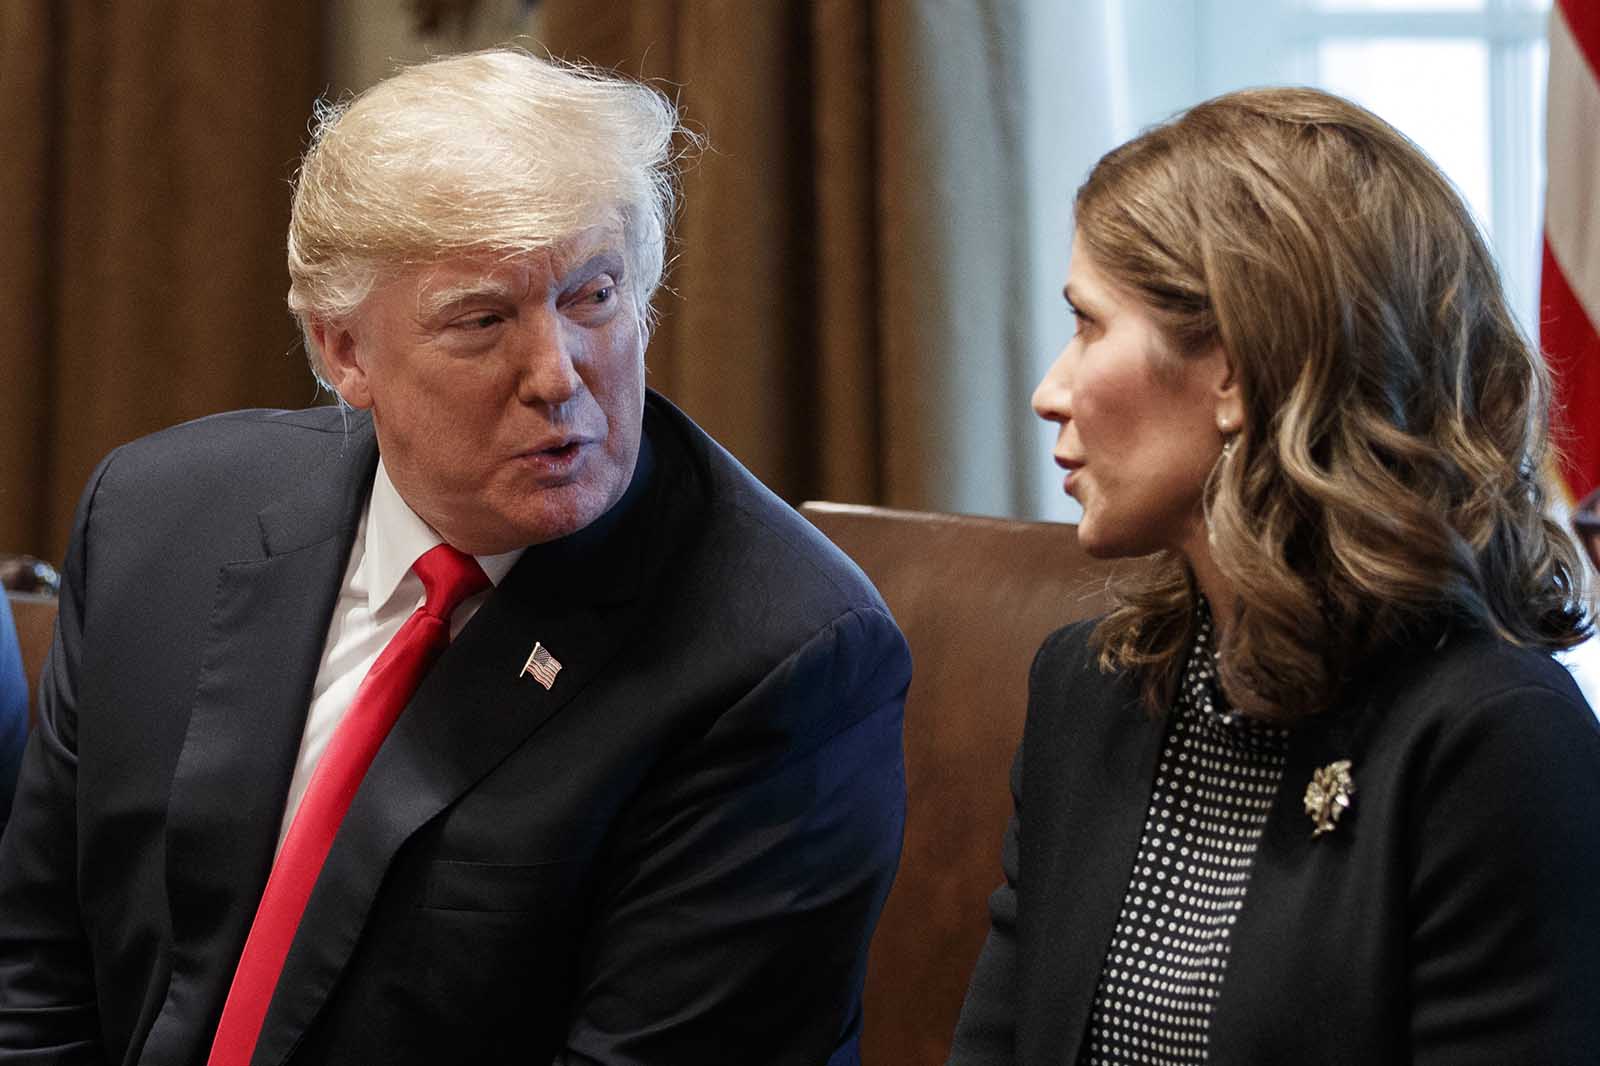 In this Dec. 12, 2018 file photo, President Donald Trump speaks to then-Gov.-elect Kristi Noem, during a meeting at White House in Washington.